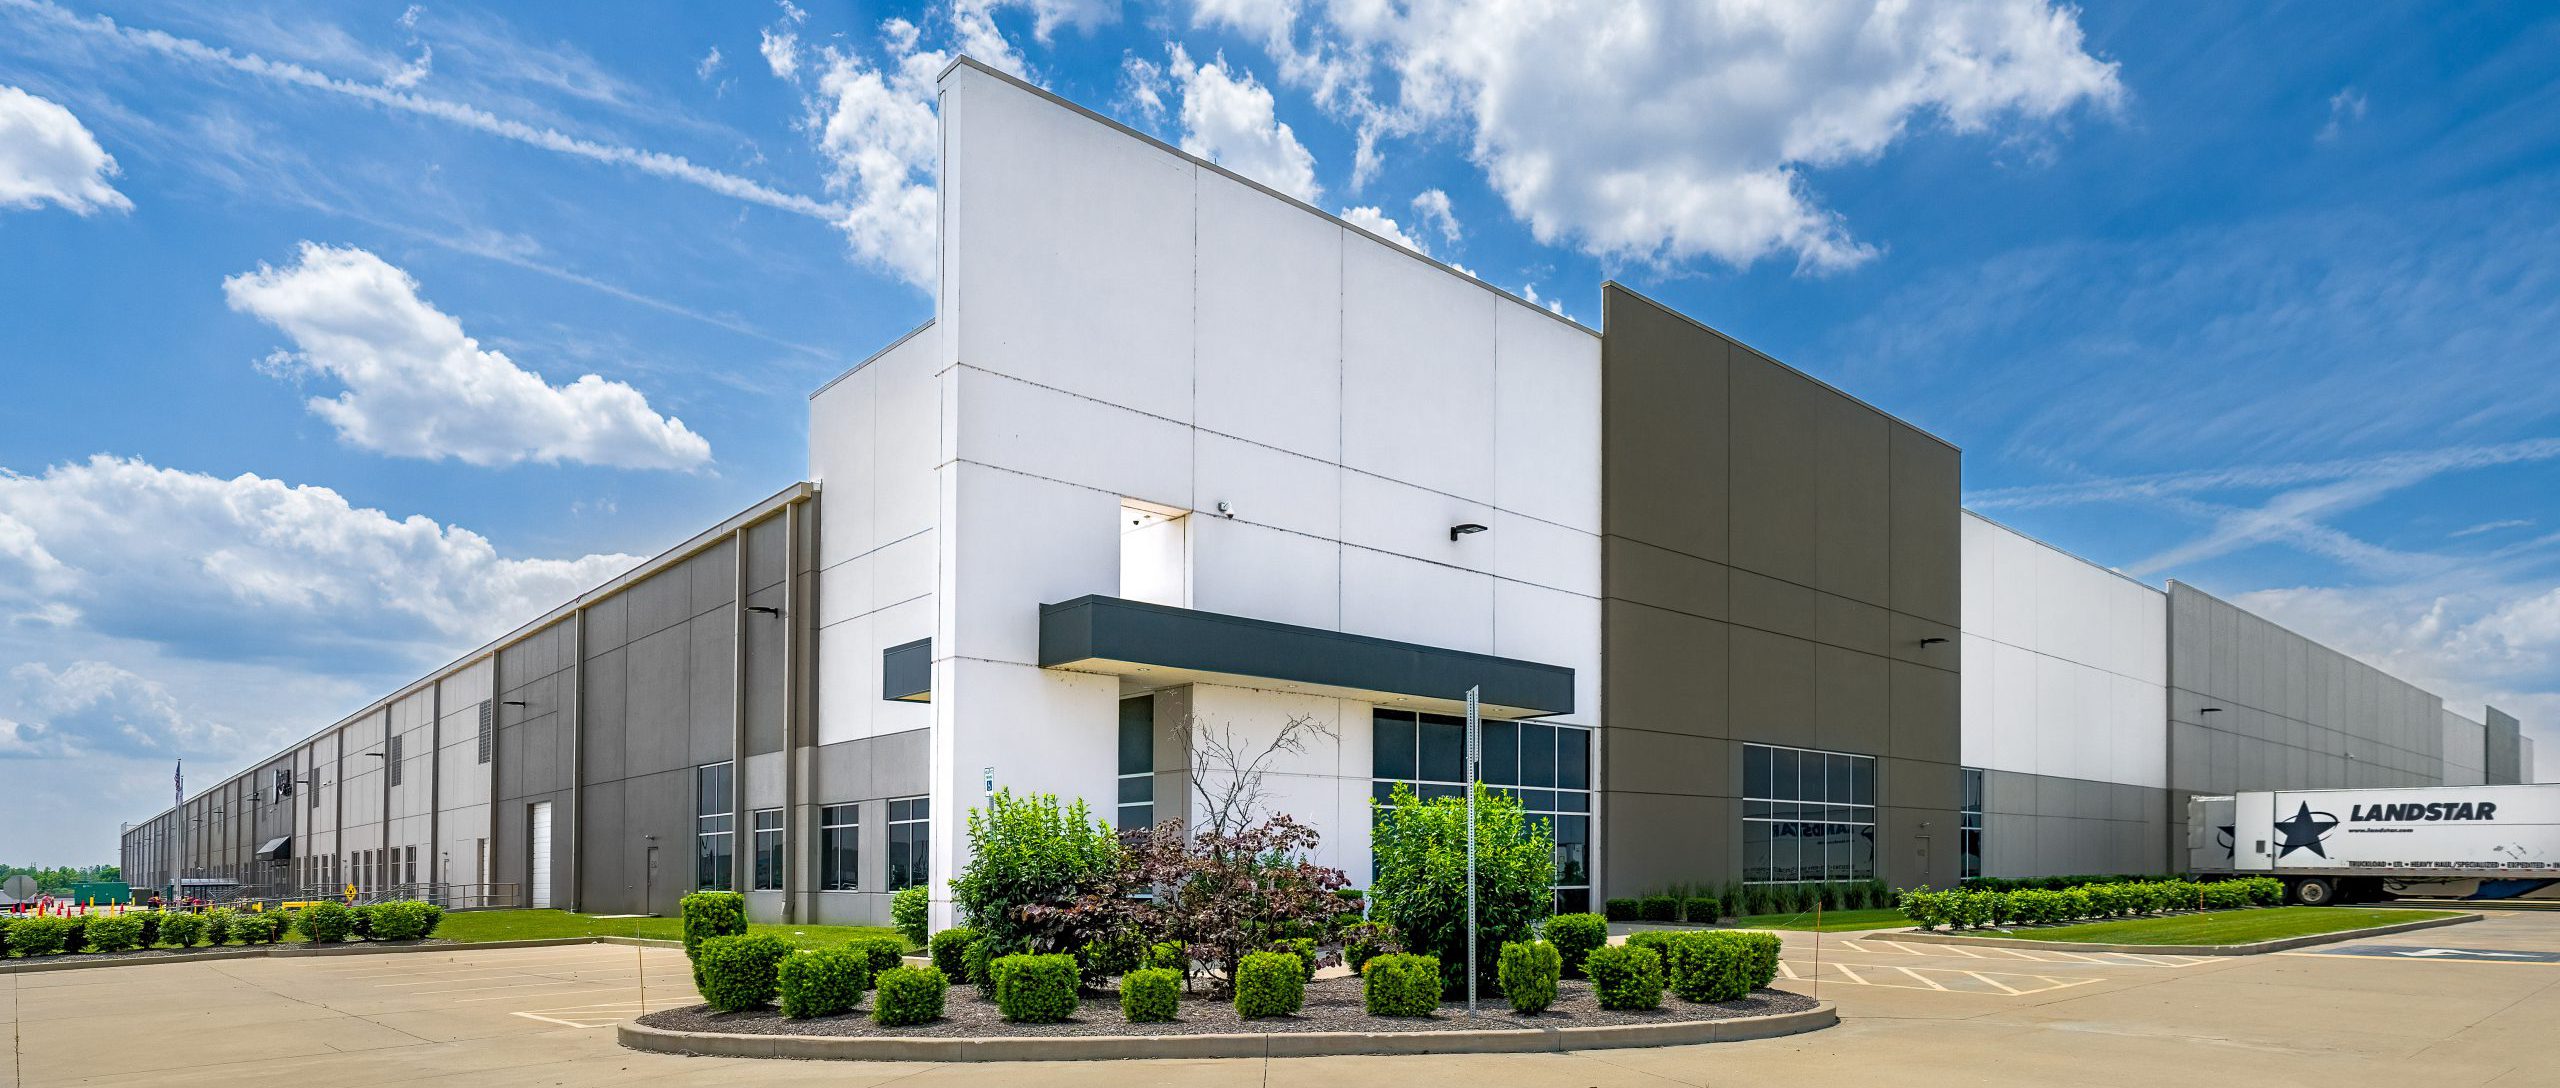 DEKA USA Property TWO LP 3050 Gateway Distribution Center achieves BREEAM certification in efforts for continual progress